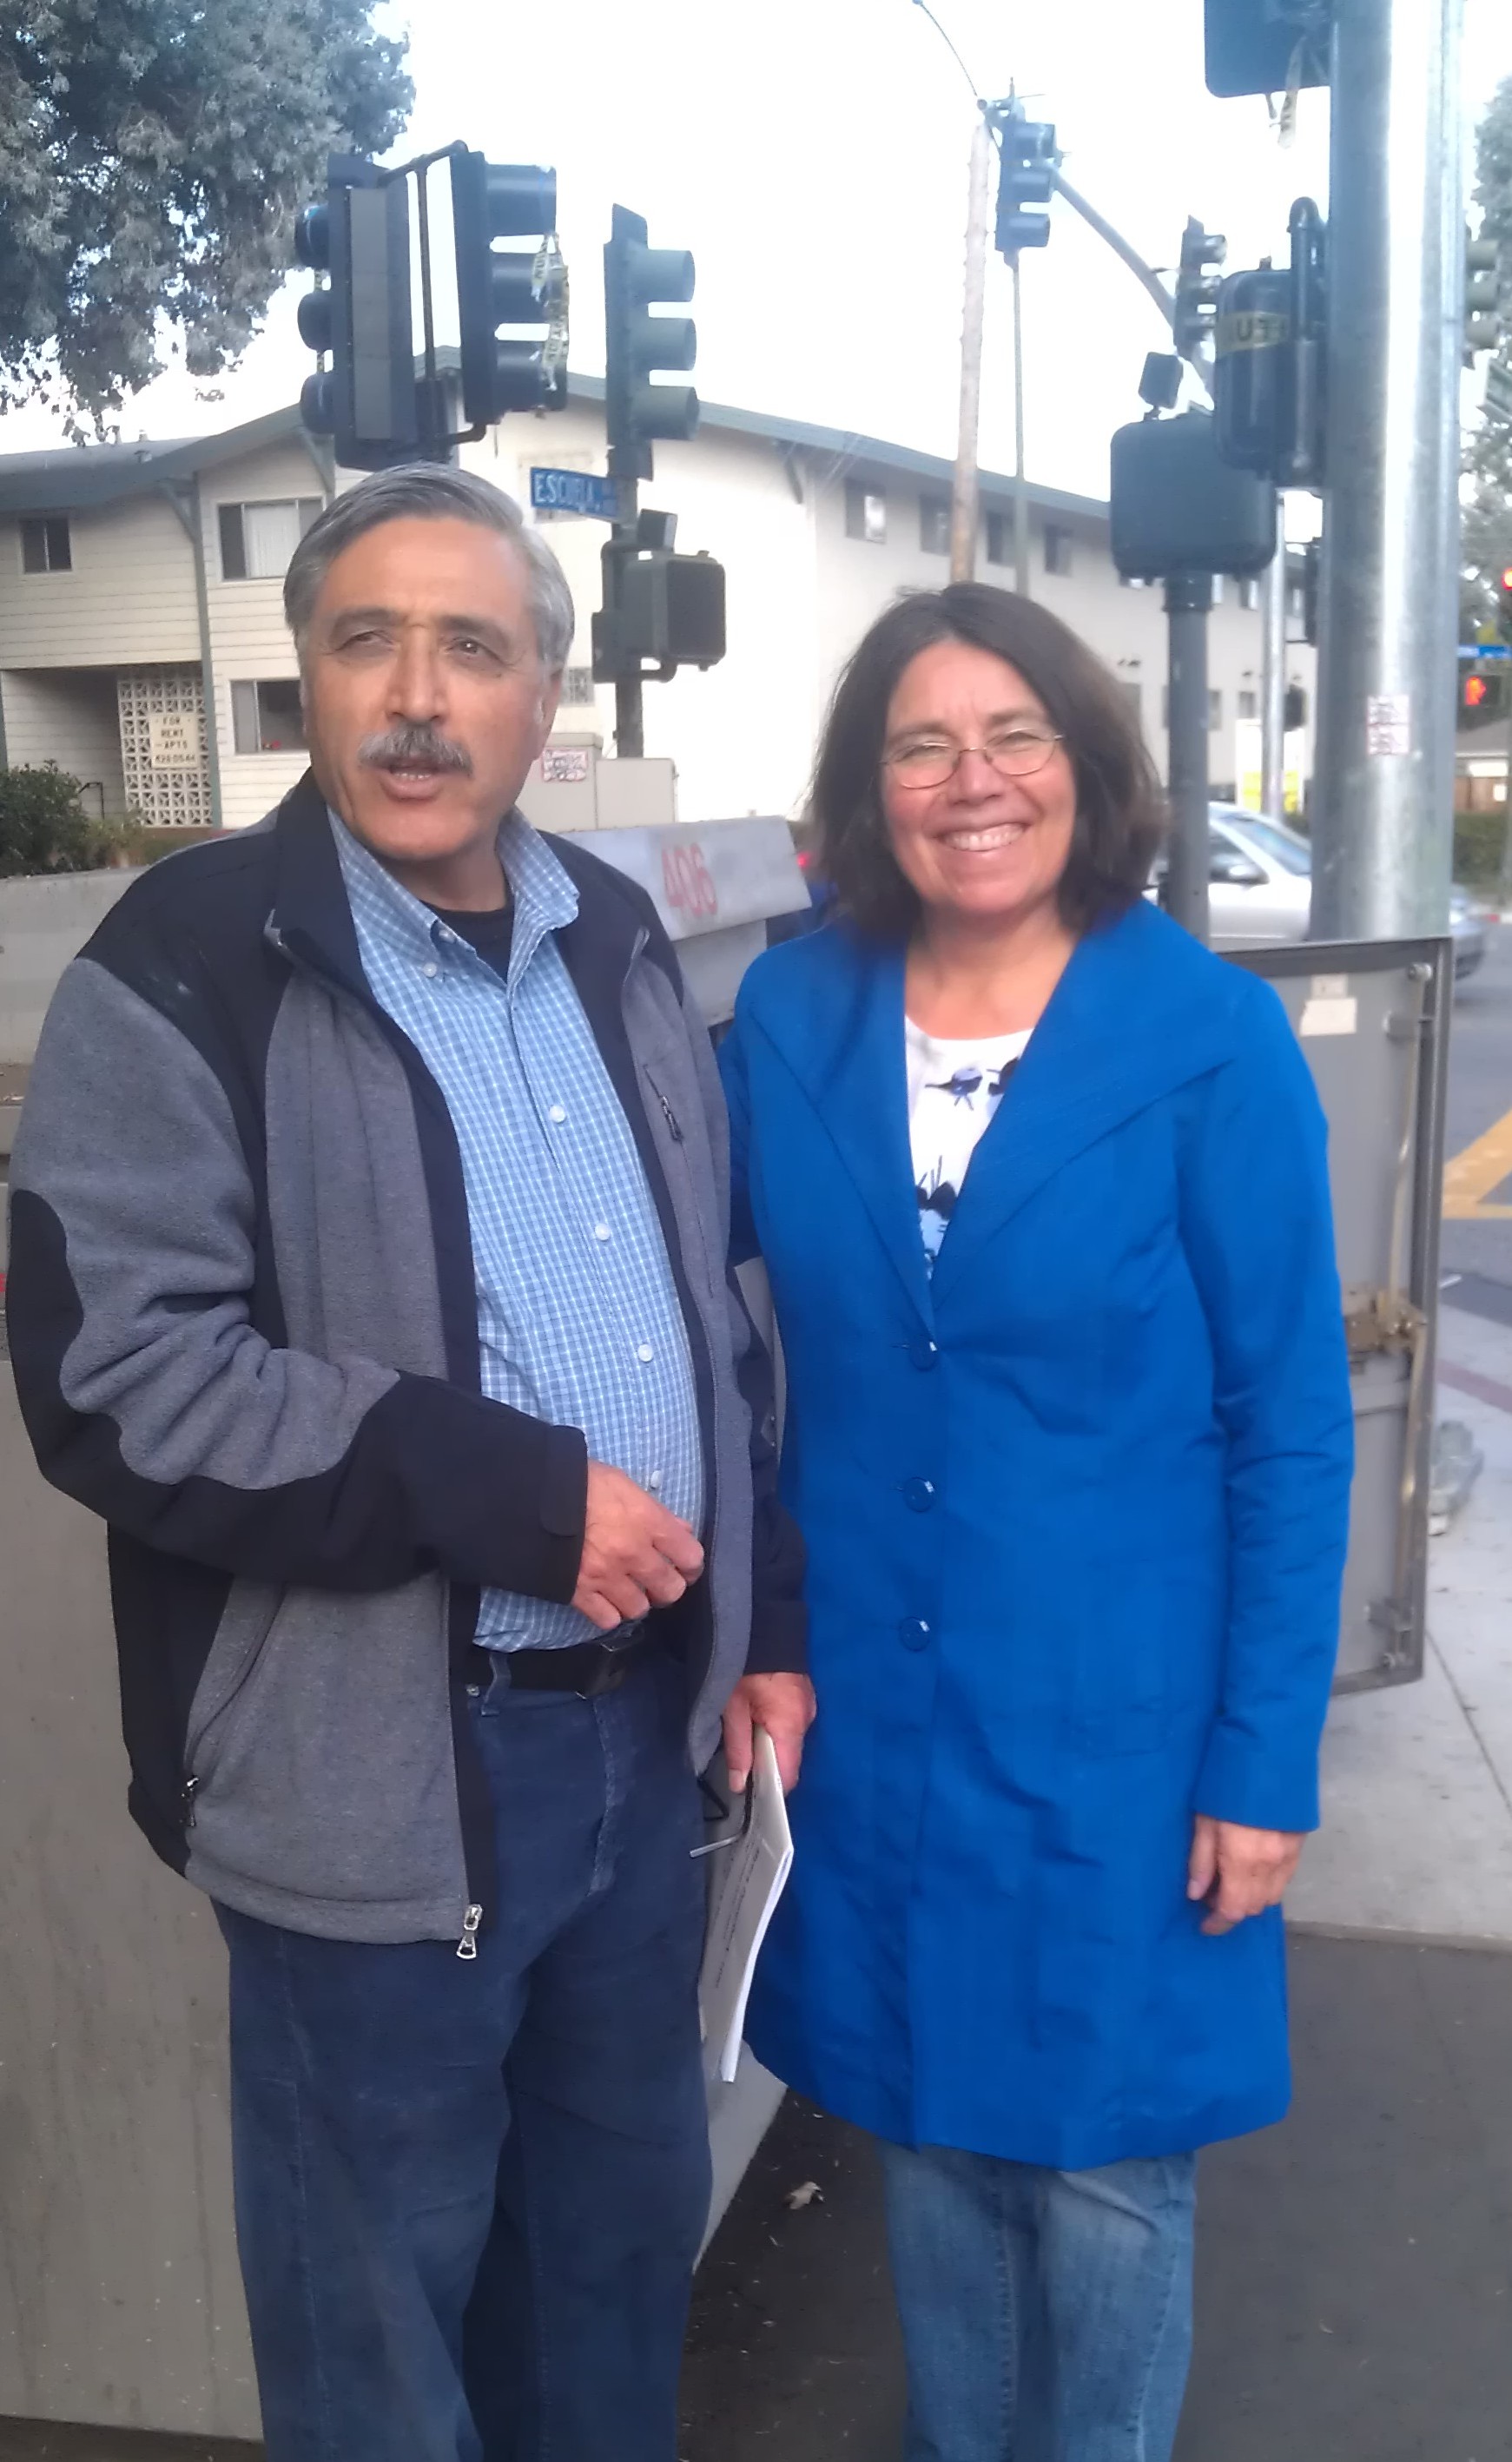 Elana Pacheco and Sayed Fakhry in front of the Electrical Box for the new Streetlight.